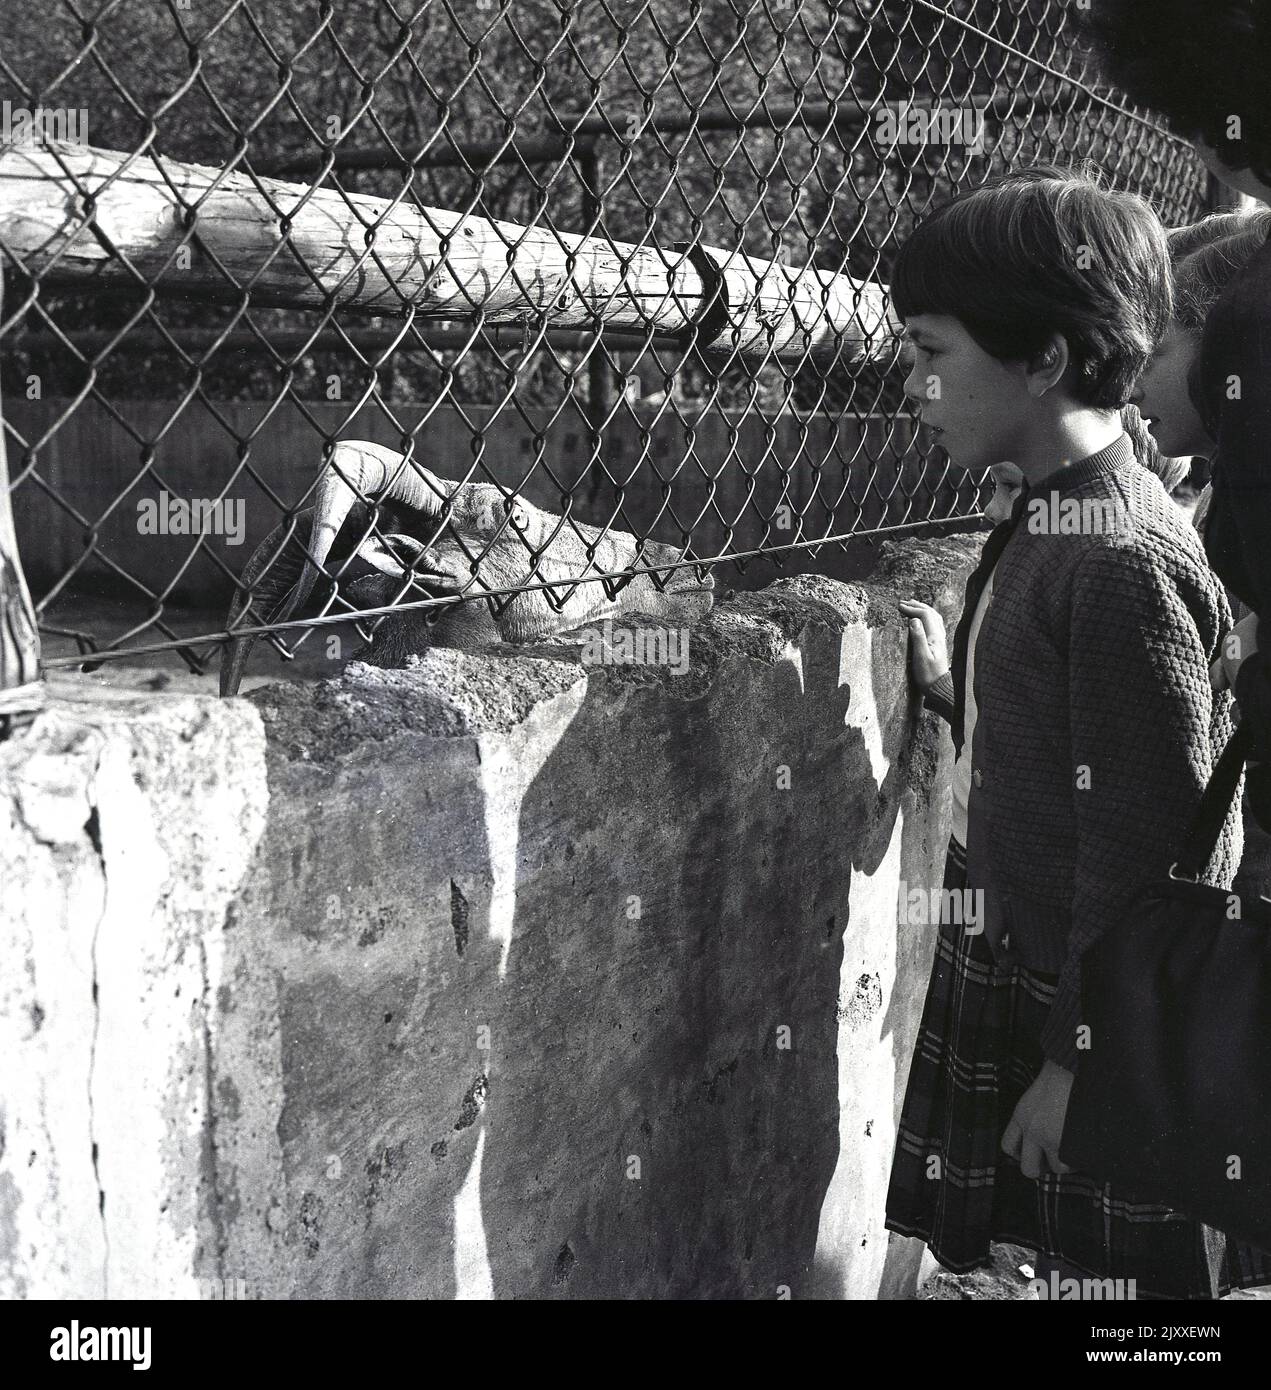 1965, historical, two young girls looking through a metal fence at a horned animal, possibly an antelope, in its enclosure at Edinburgh Zoo, Scotland, UK. Stock Photo